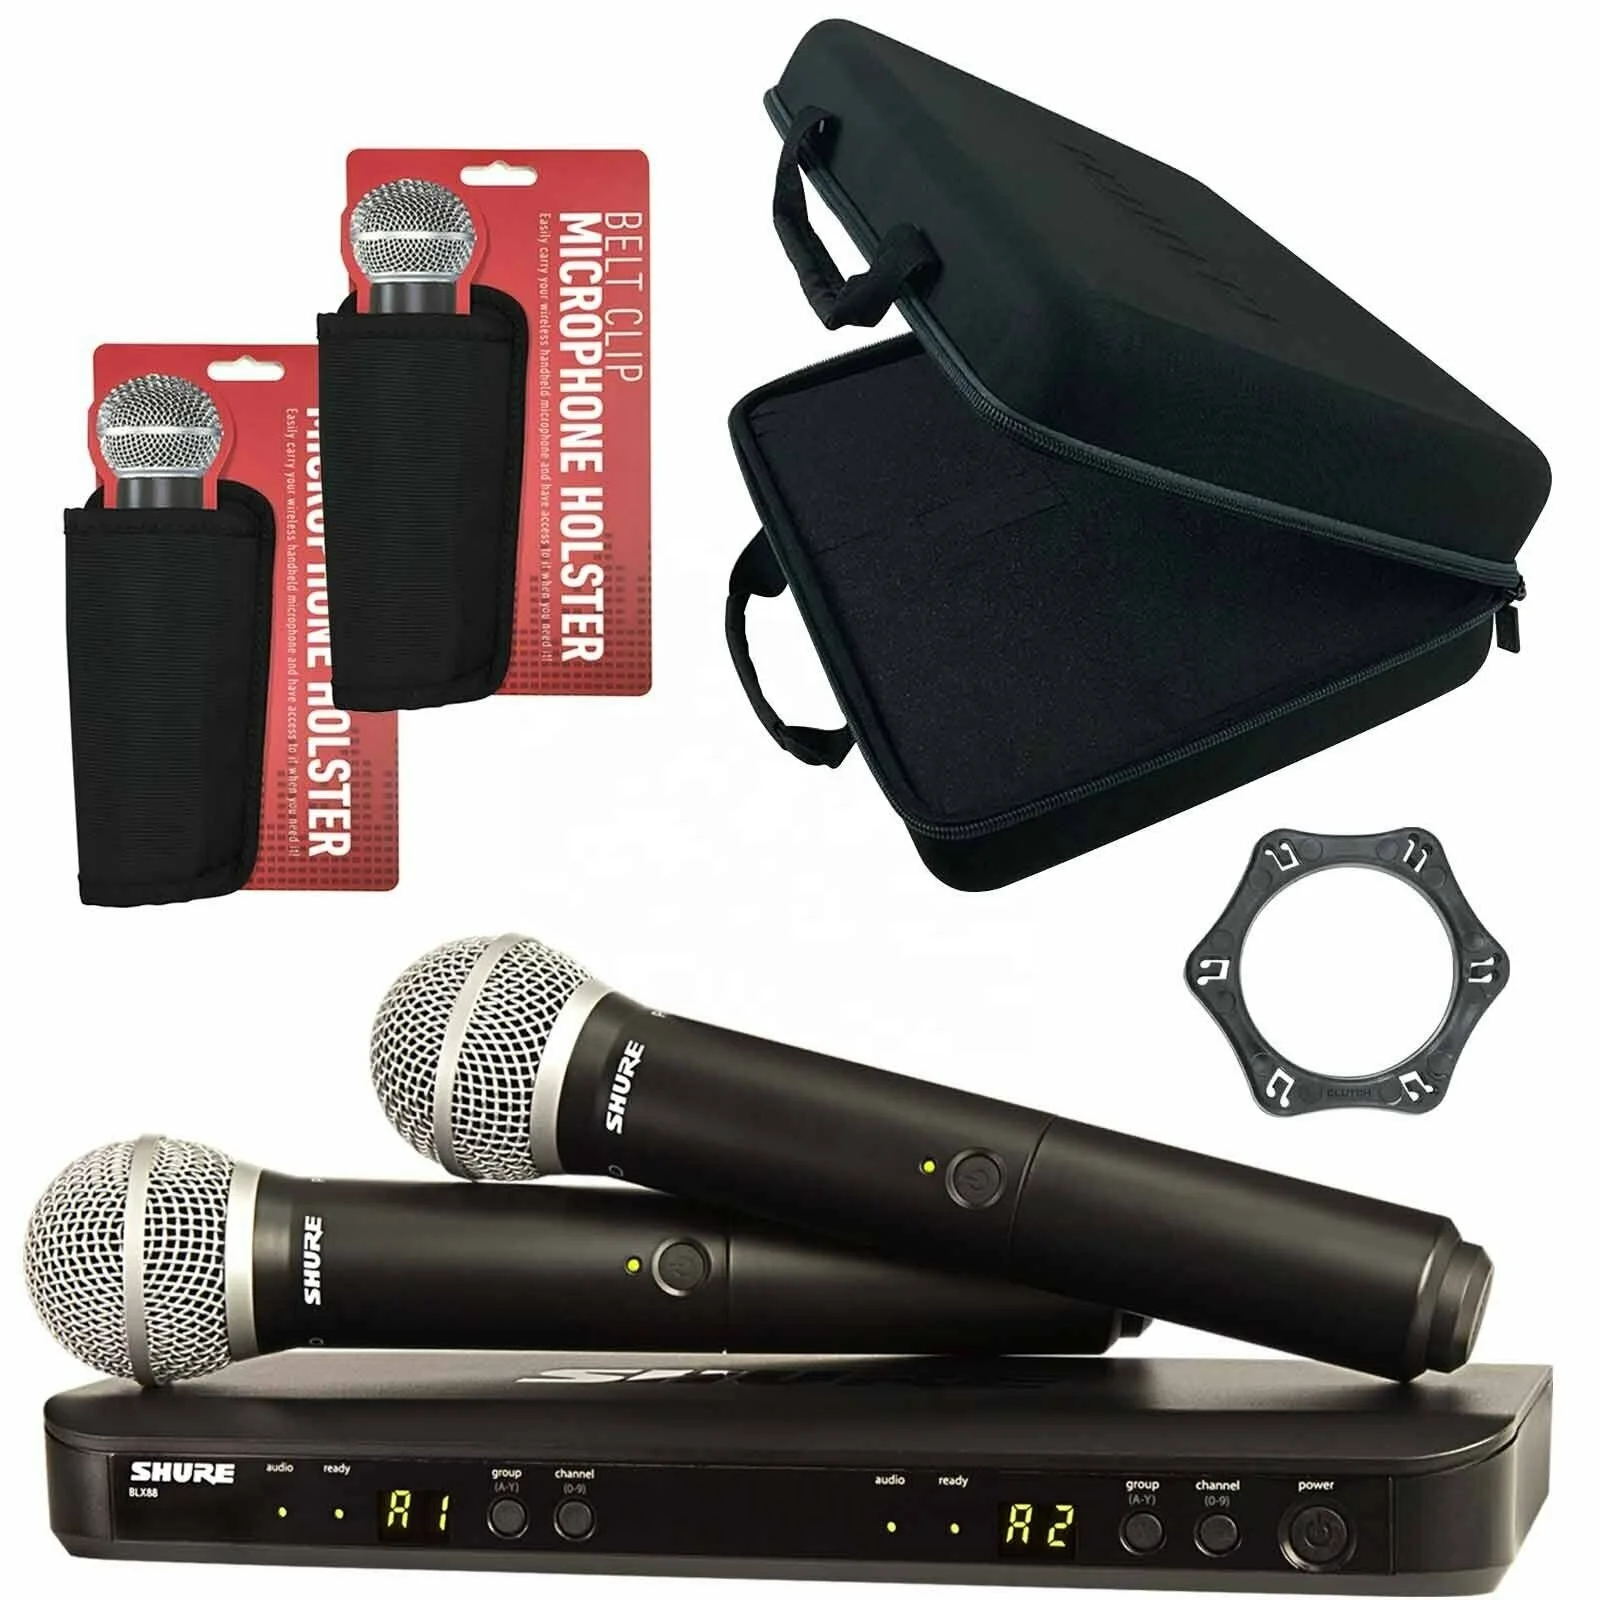 

SUMMER SALES DISCOUNT ON Buy With Confidence New Shure BLX288/PG58 Dual Vocal Handheld Wireless DJ Microphone System+ Case